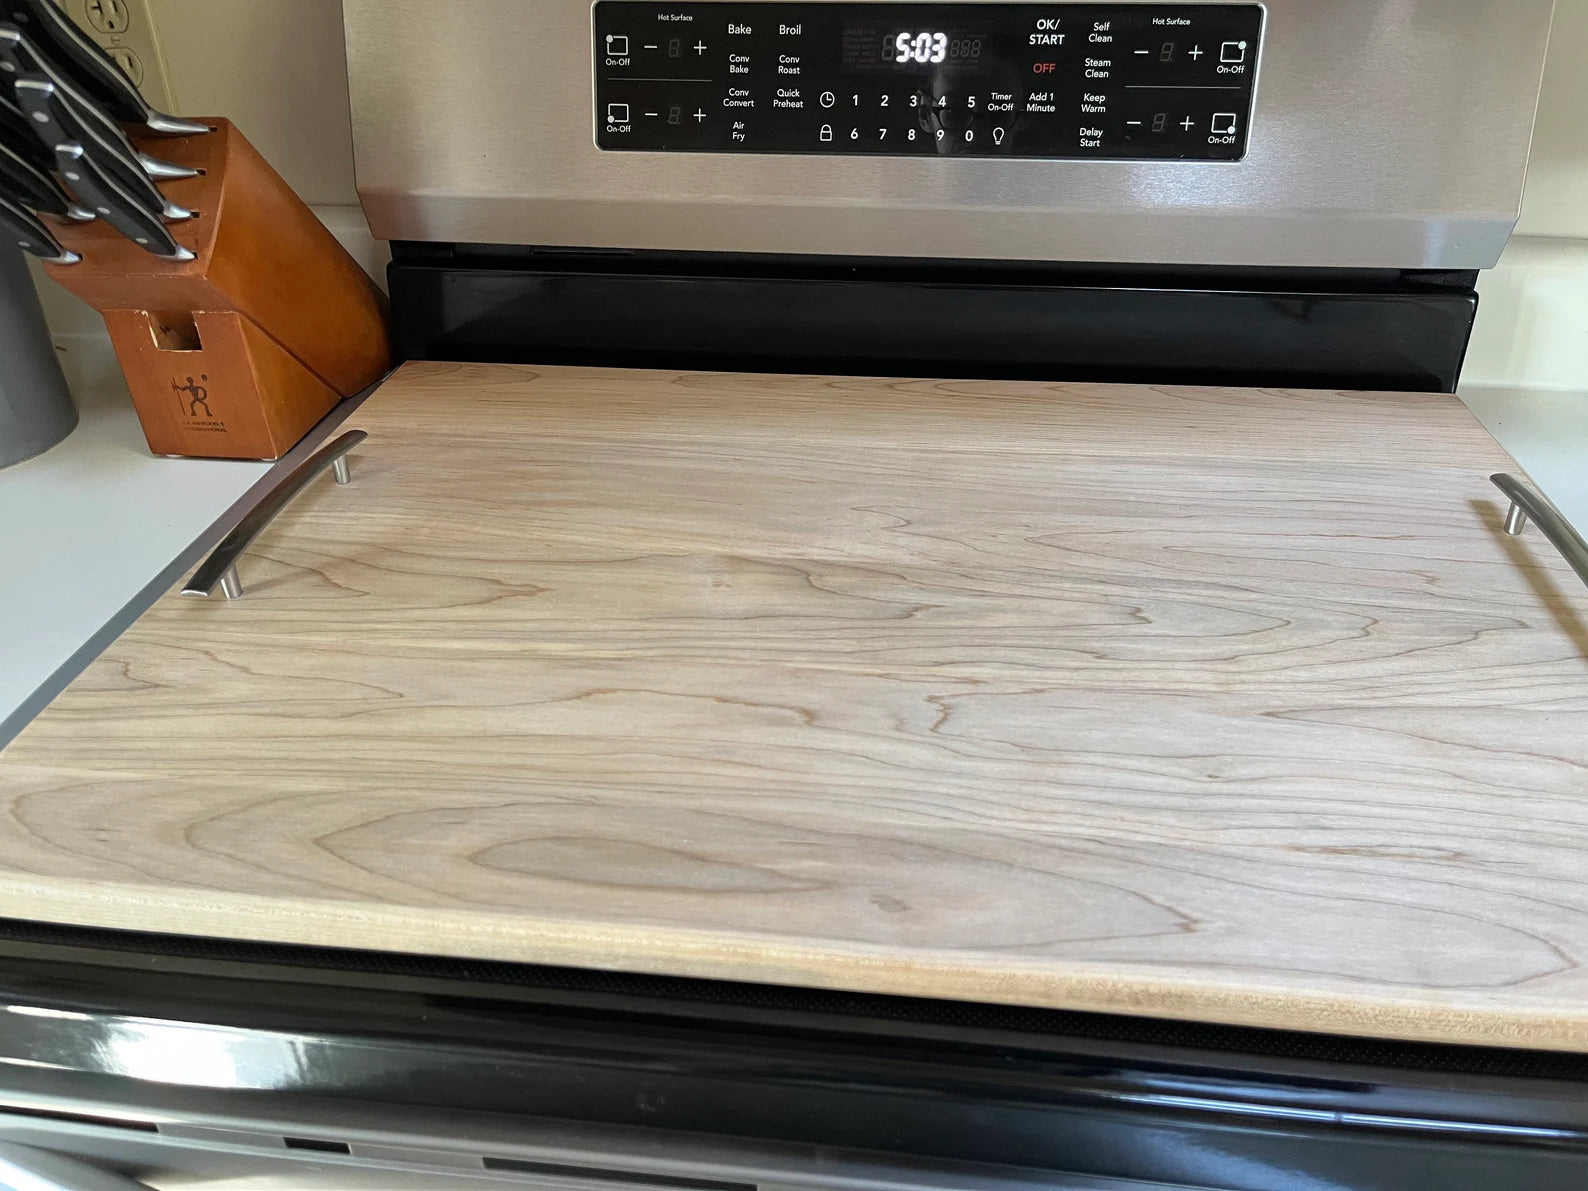 Noodle Board / Wooden Stove Top Cover